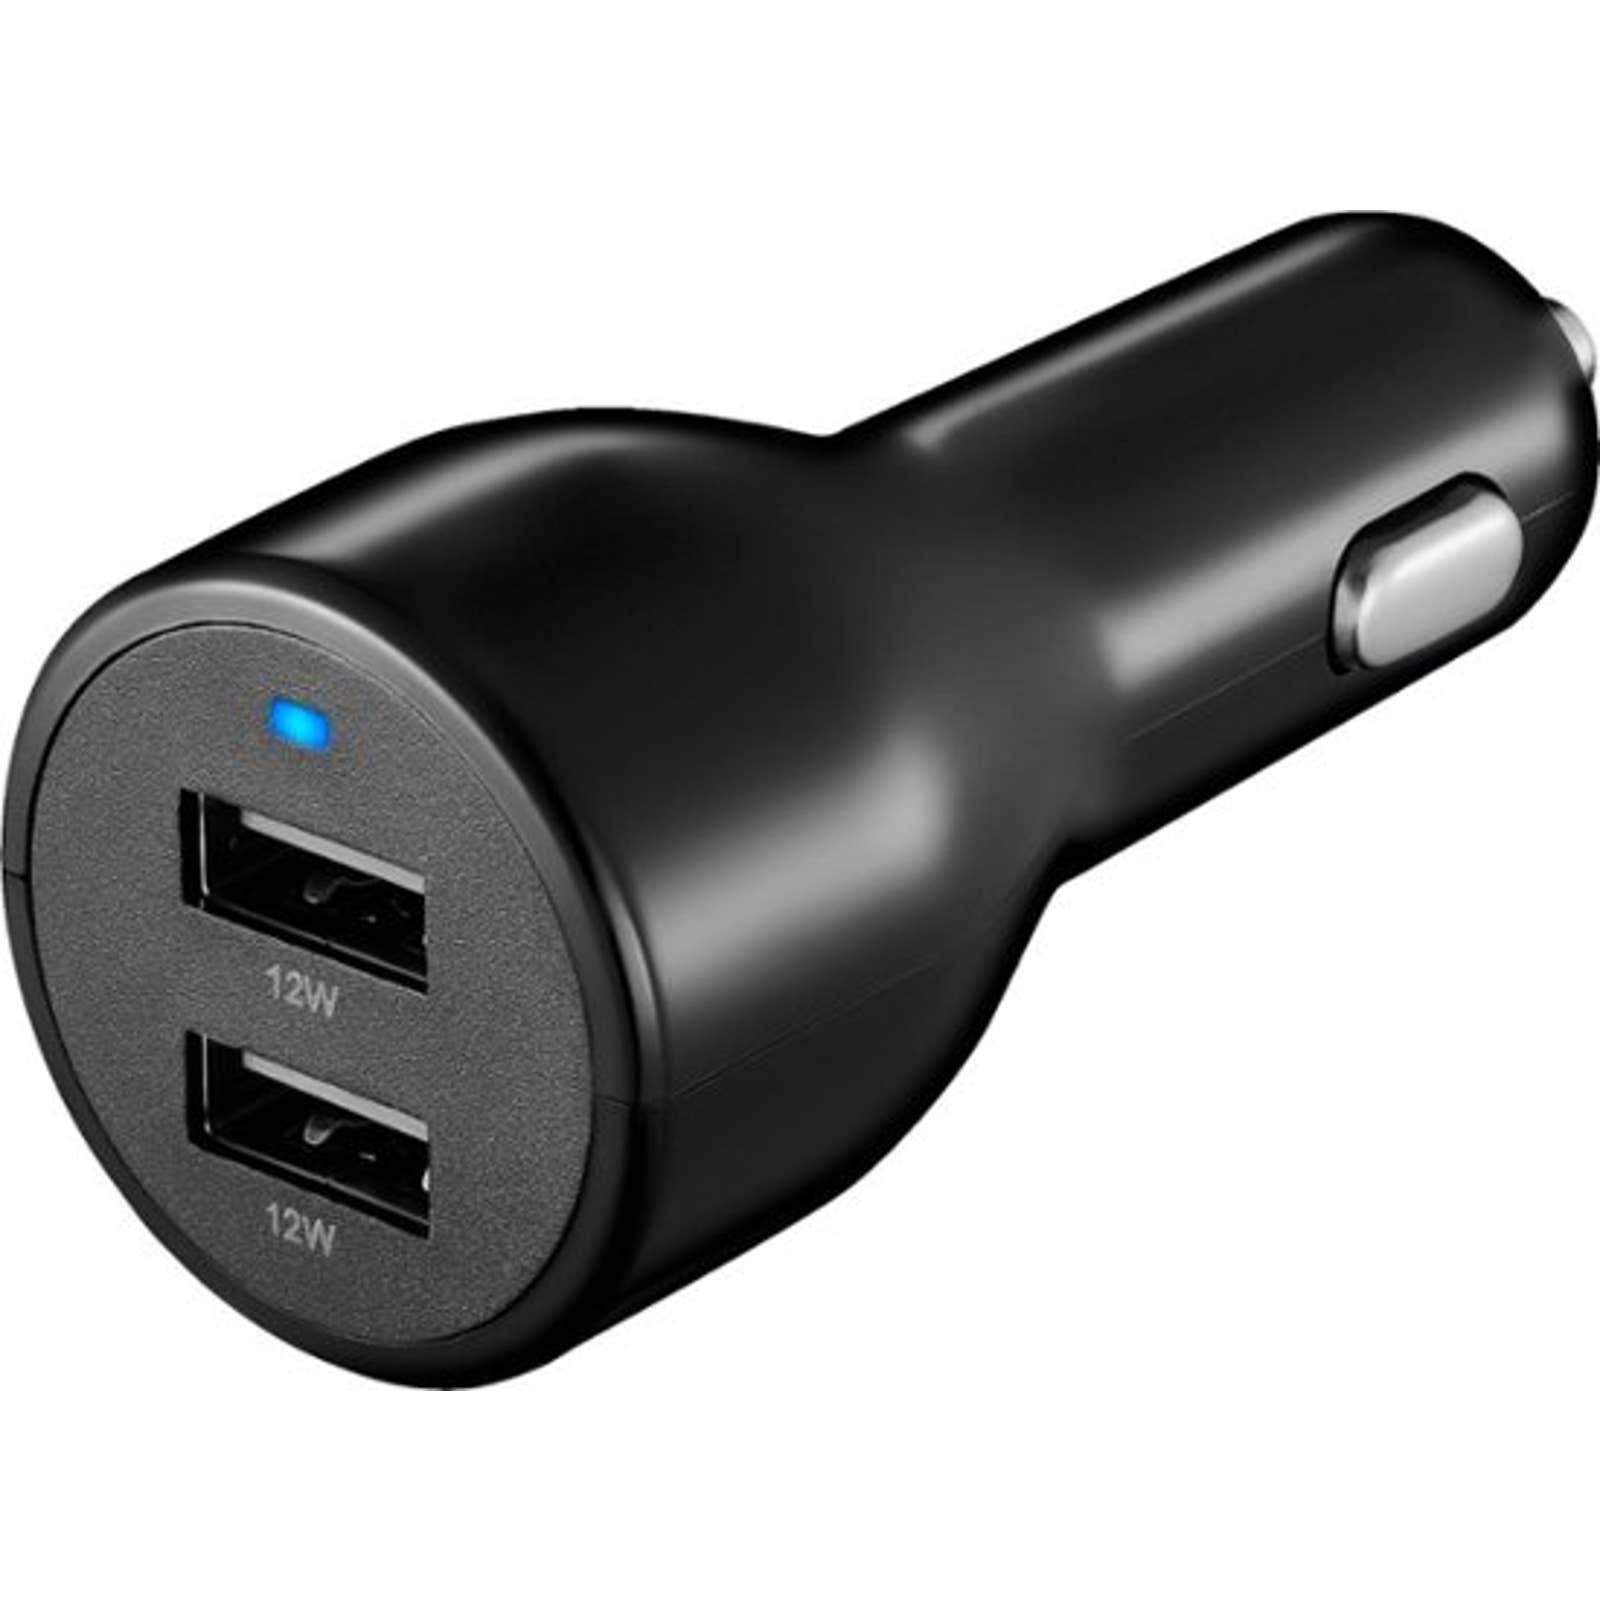 Insignia™ - NS-MCC24W2K 24 W Vehicle Charger with 2 USB Ports - Black